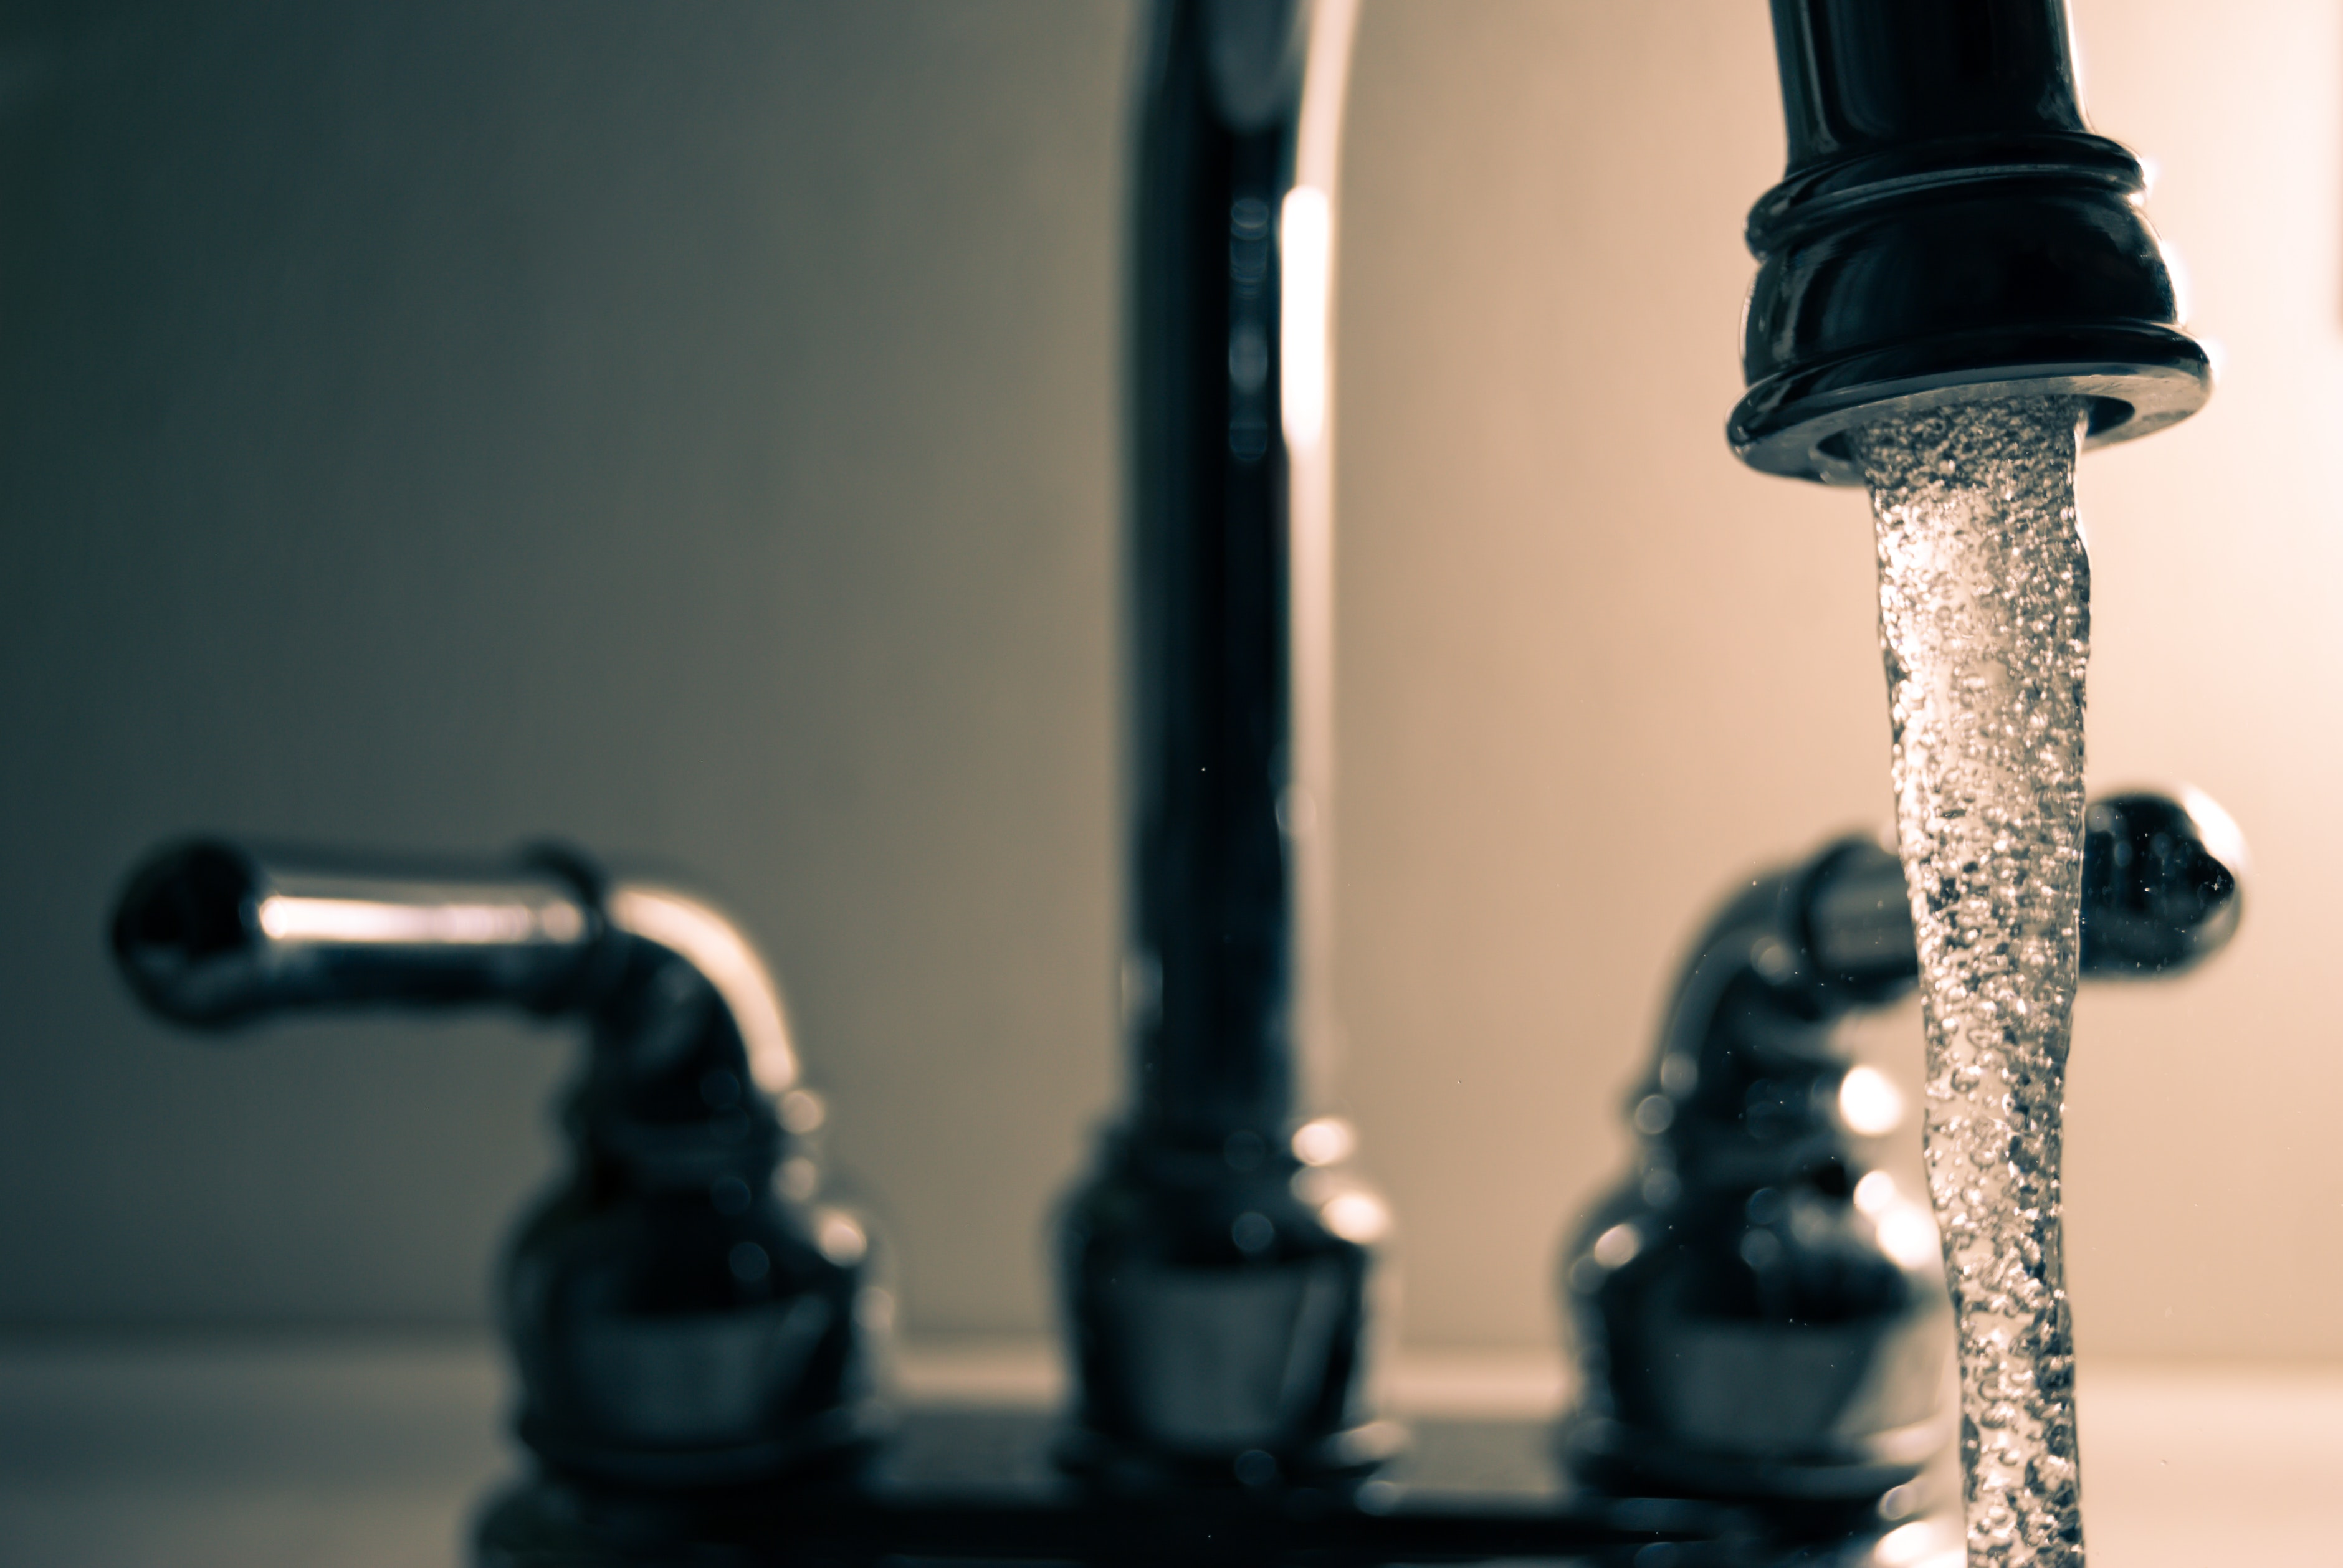 How to choose a water faucet filter correctly